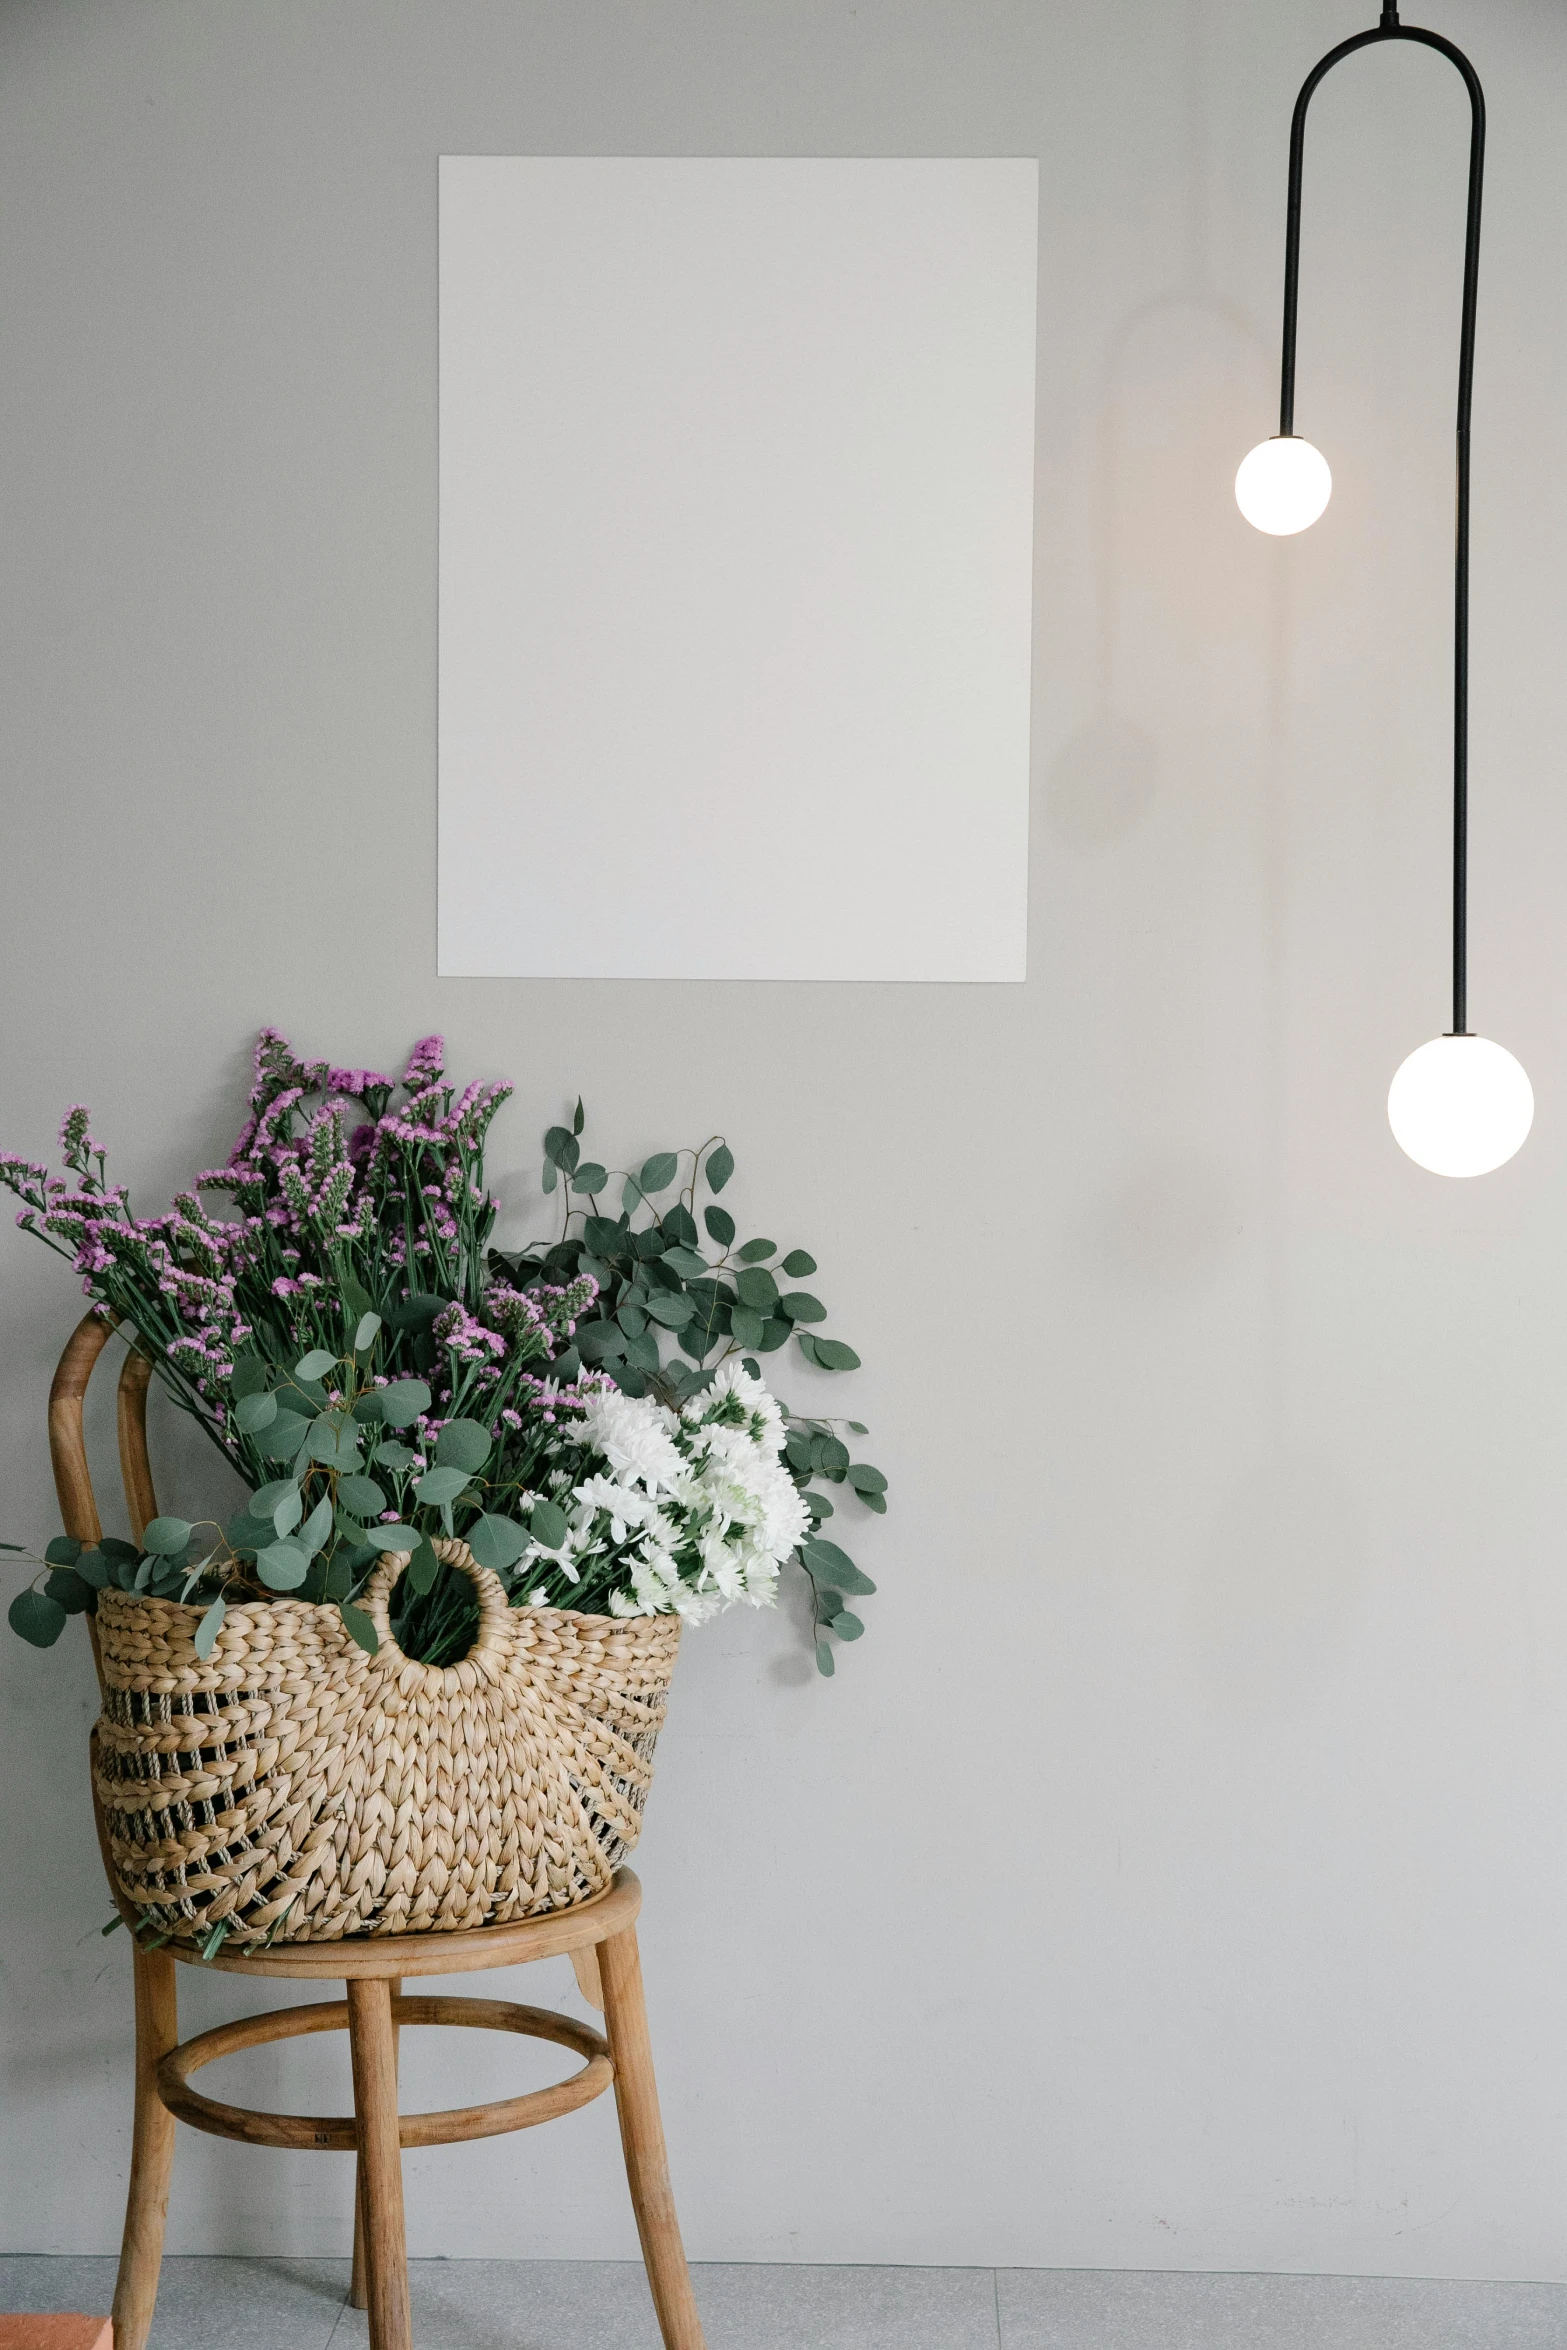 a basket sitting on top of a wooden chair next to a plant, inspired by Constantin Hansen, pexels contest winner, light and space, lights on ceiling, hanging out with orbs, with a white background, with flowers